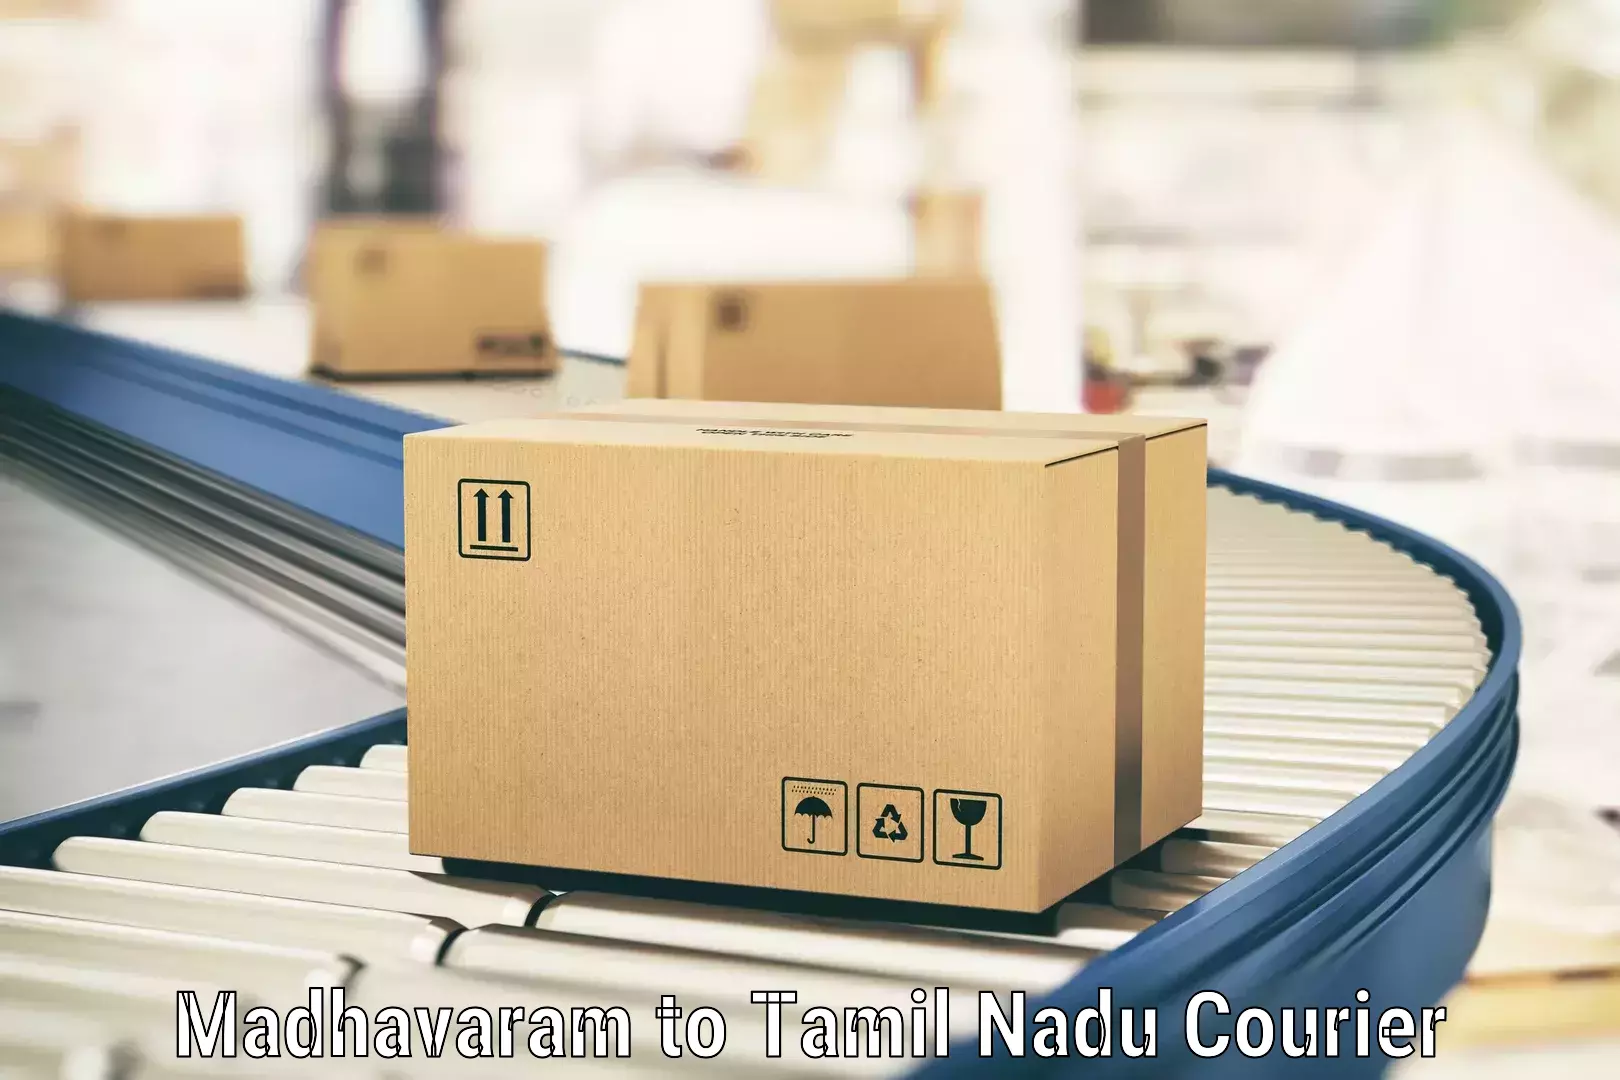 Courier service partnerships Madhavaram to Ooty